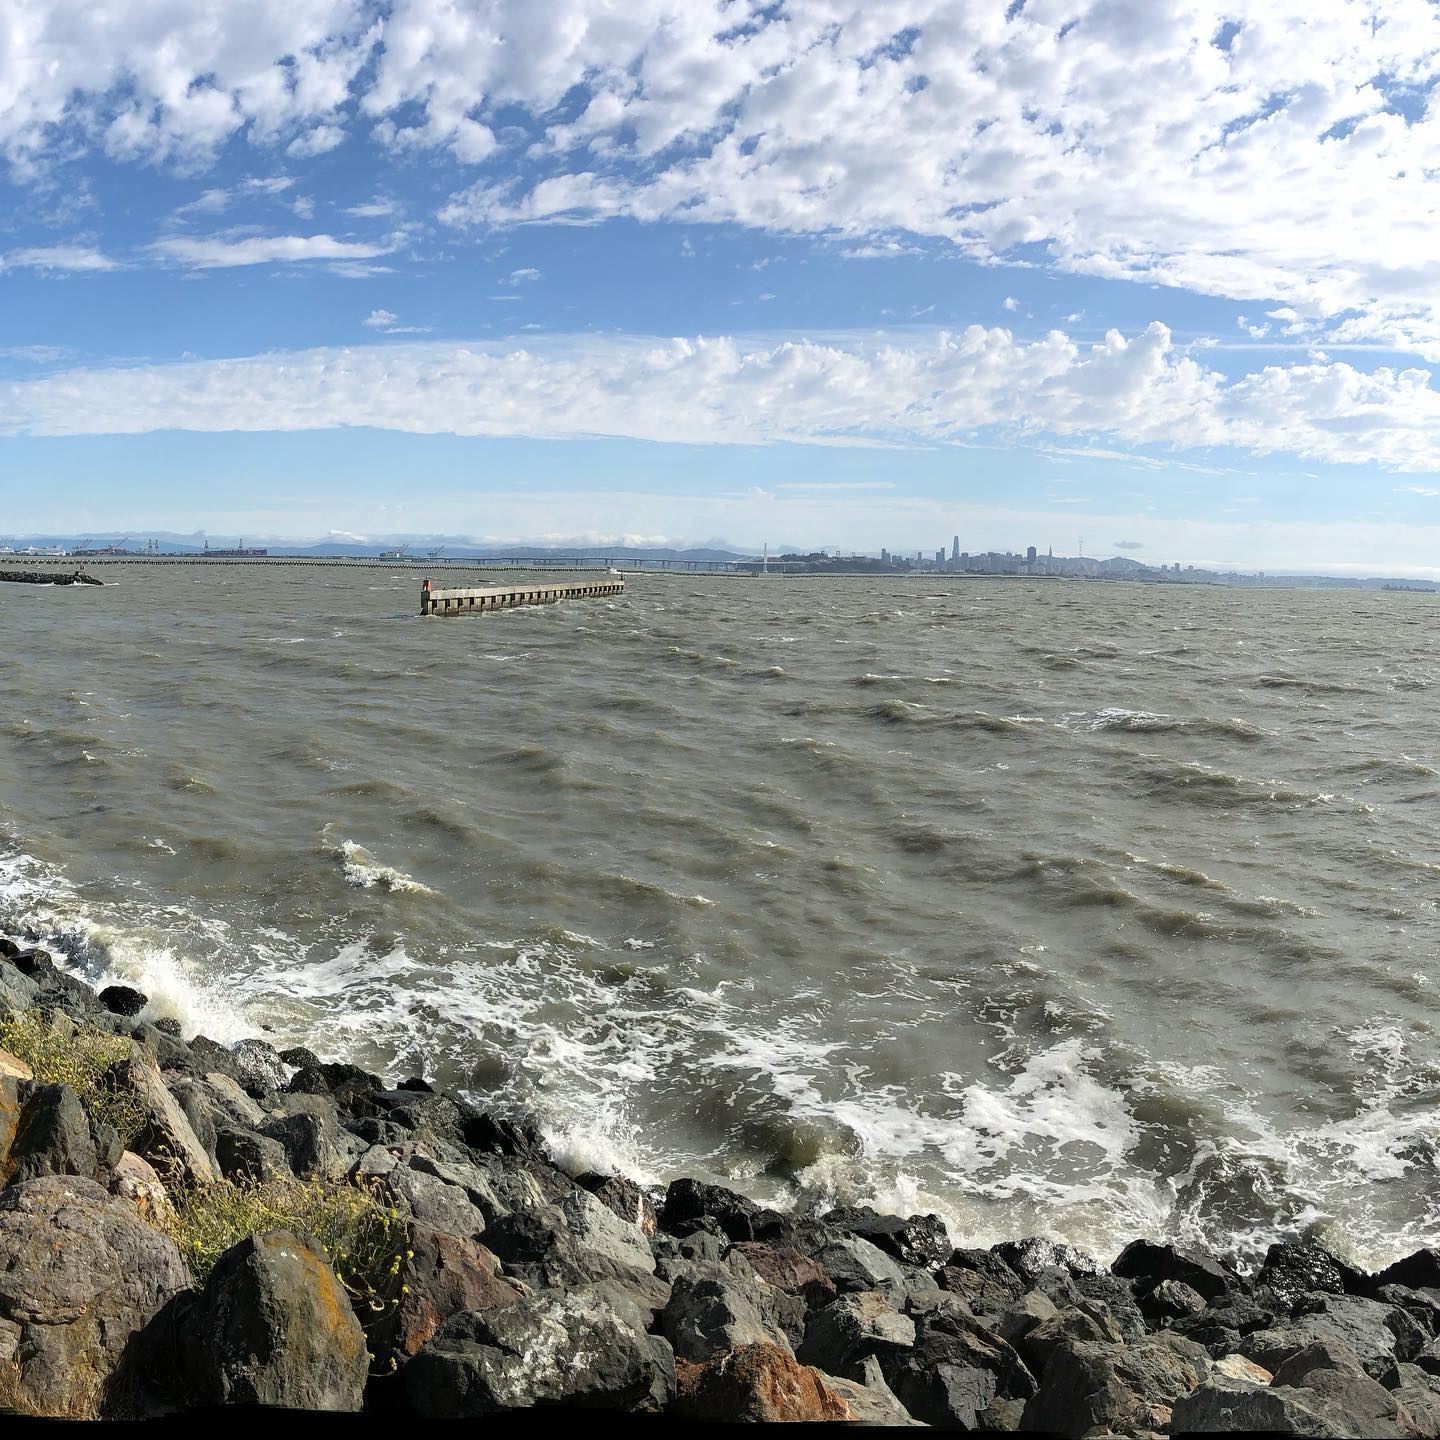 Gorgeous breeze on Friday afternoon at the Berkeley Marina.